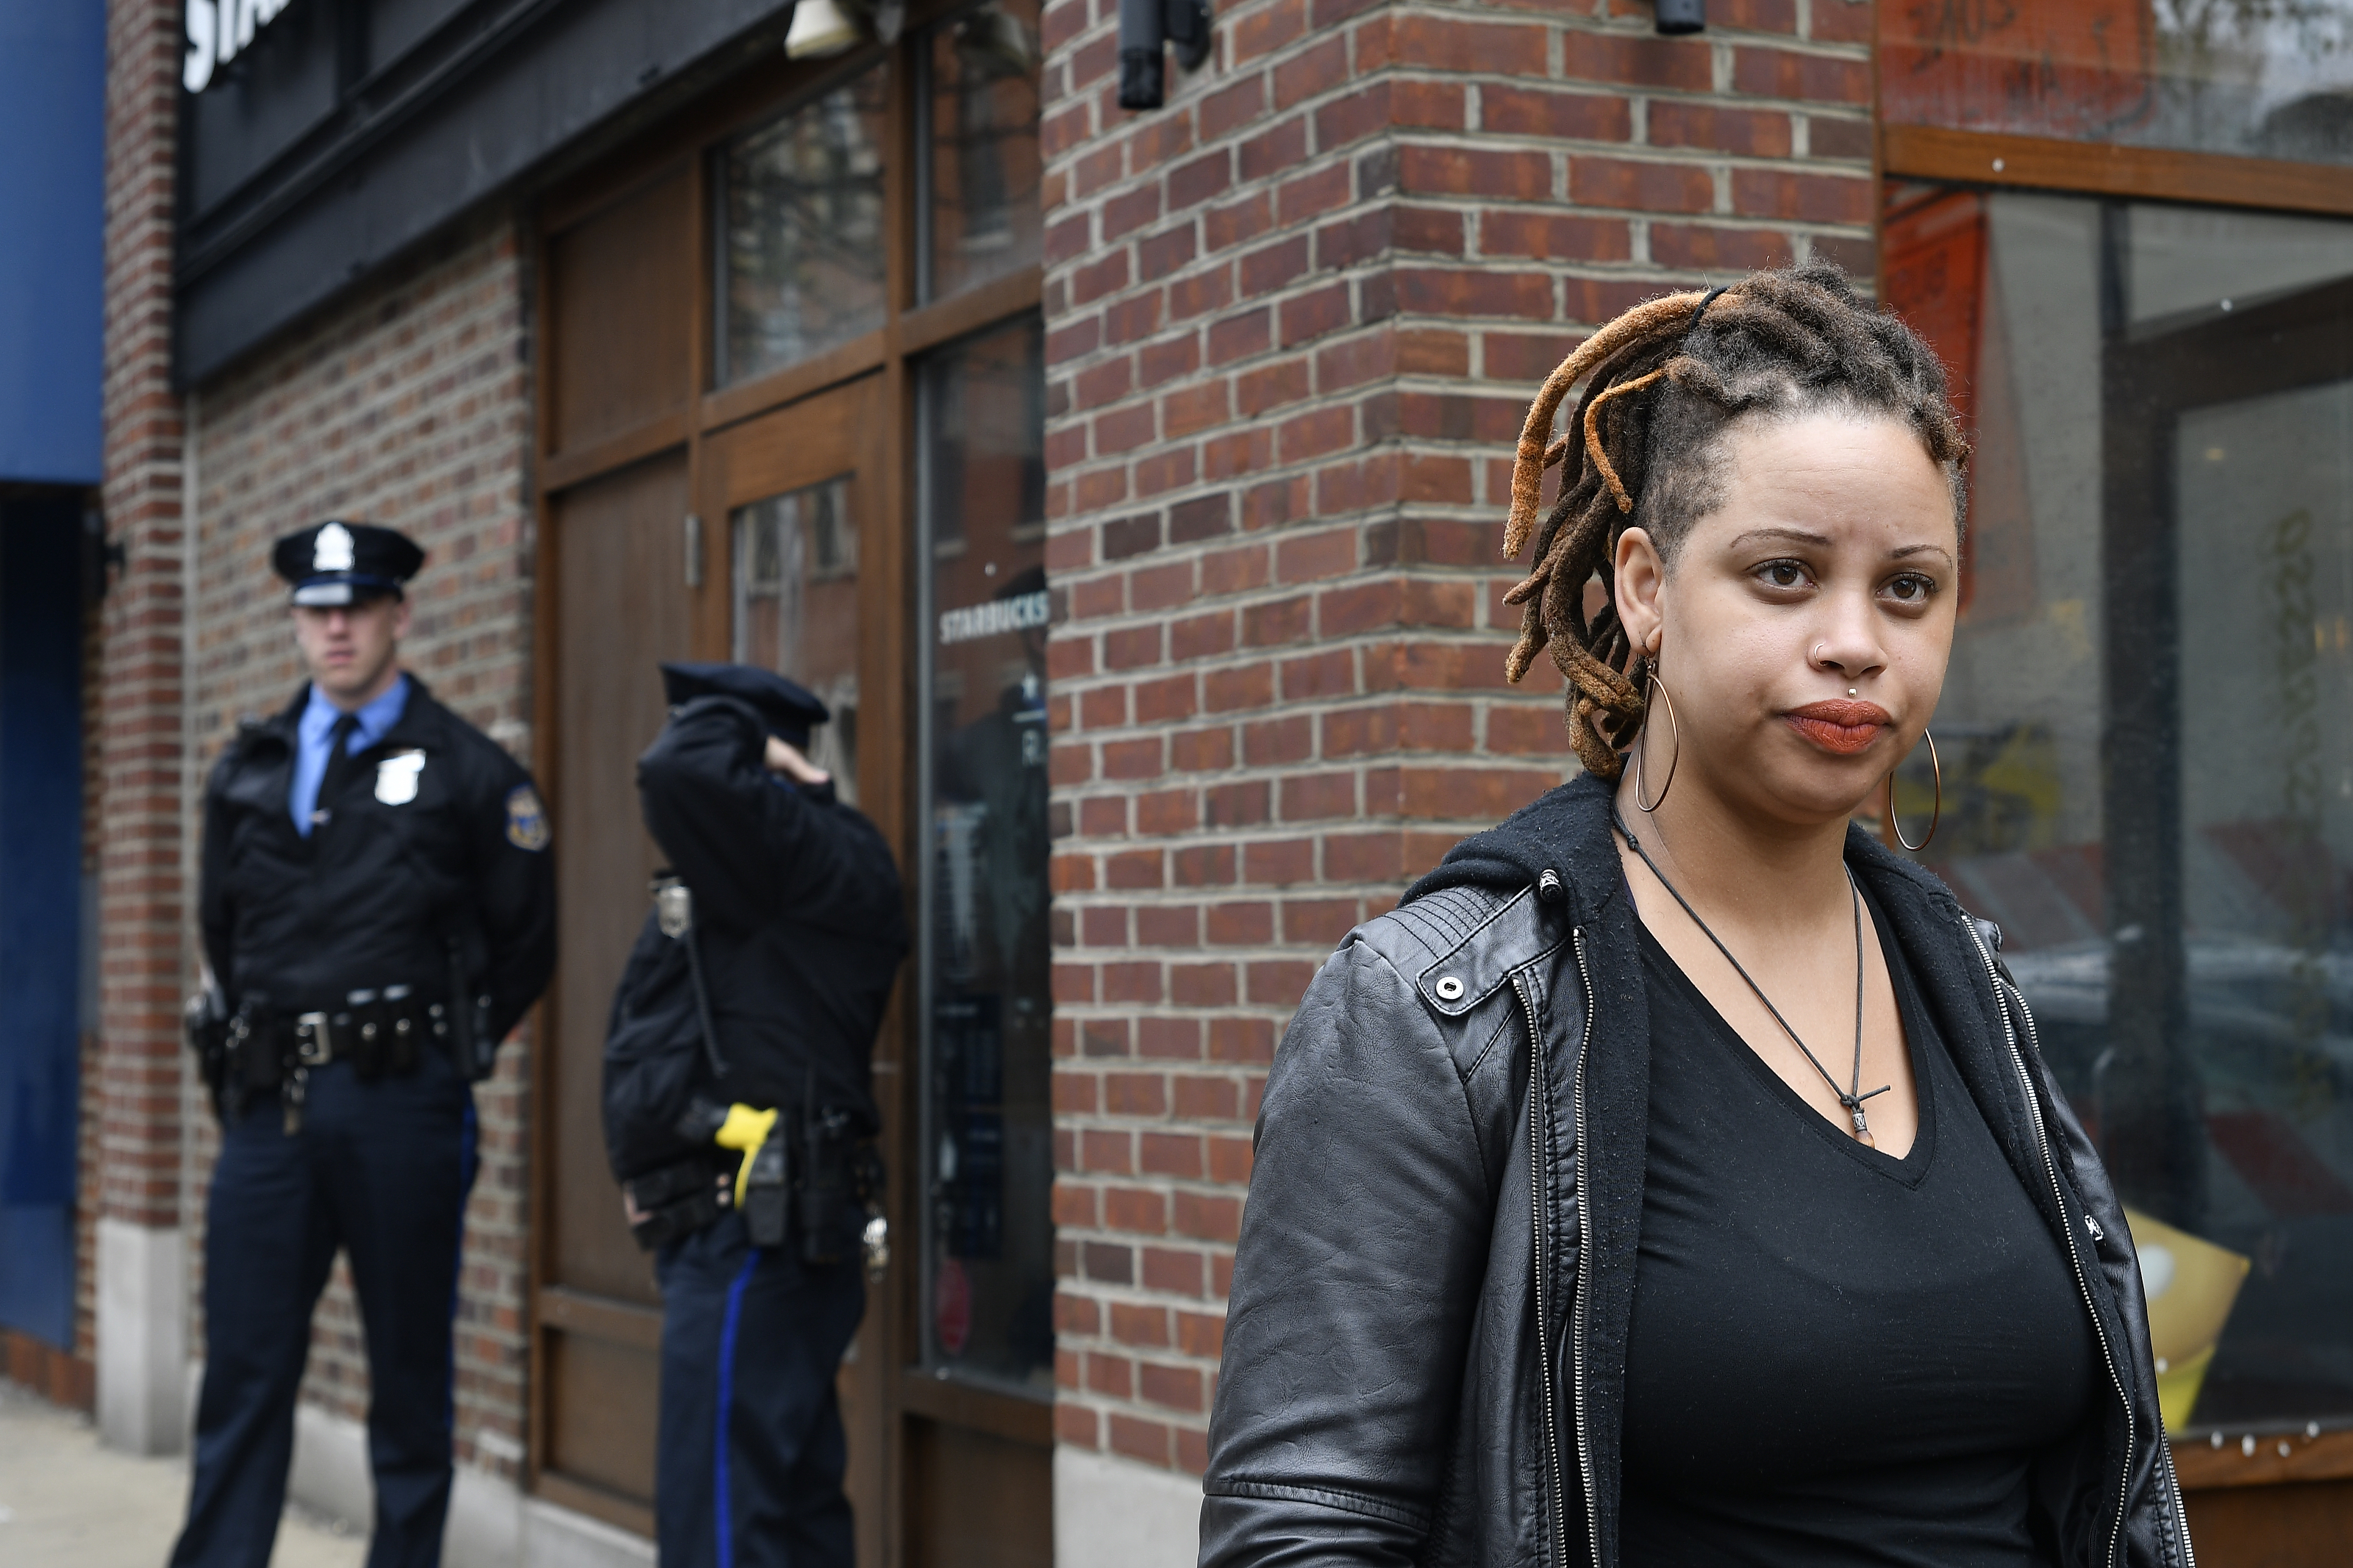 Shani Akilah Robin was one of an estimated 50 people protesting the controversial arrest of two black Starbucks patrons at the chain's Rittenhouse location on April 16. (Bastiaan Slabbers/For WHYY)